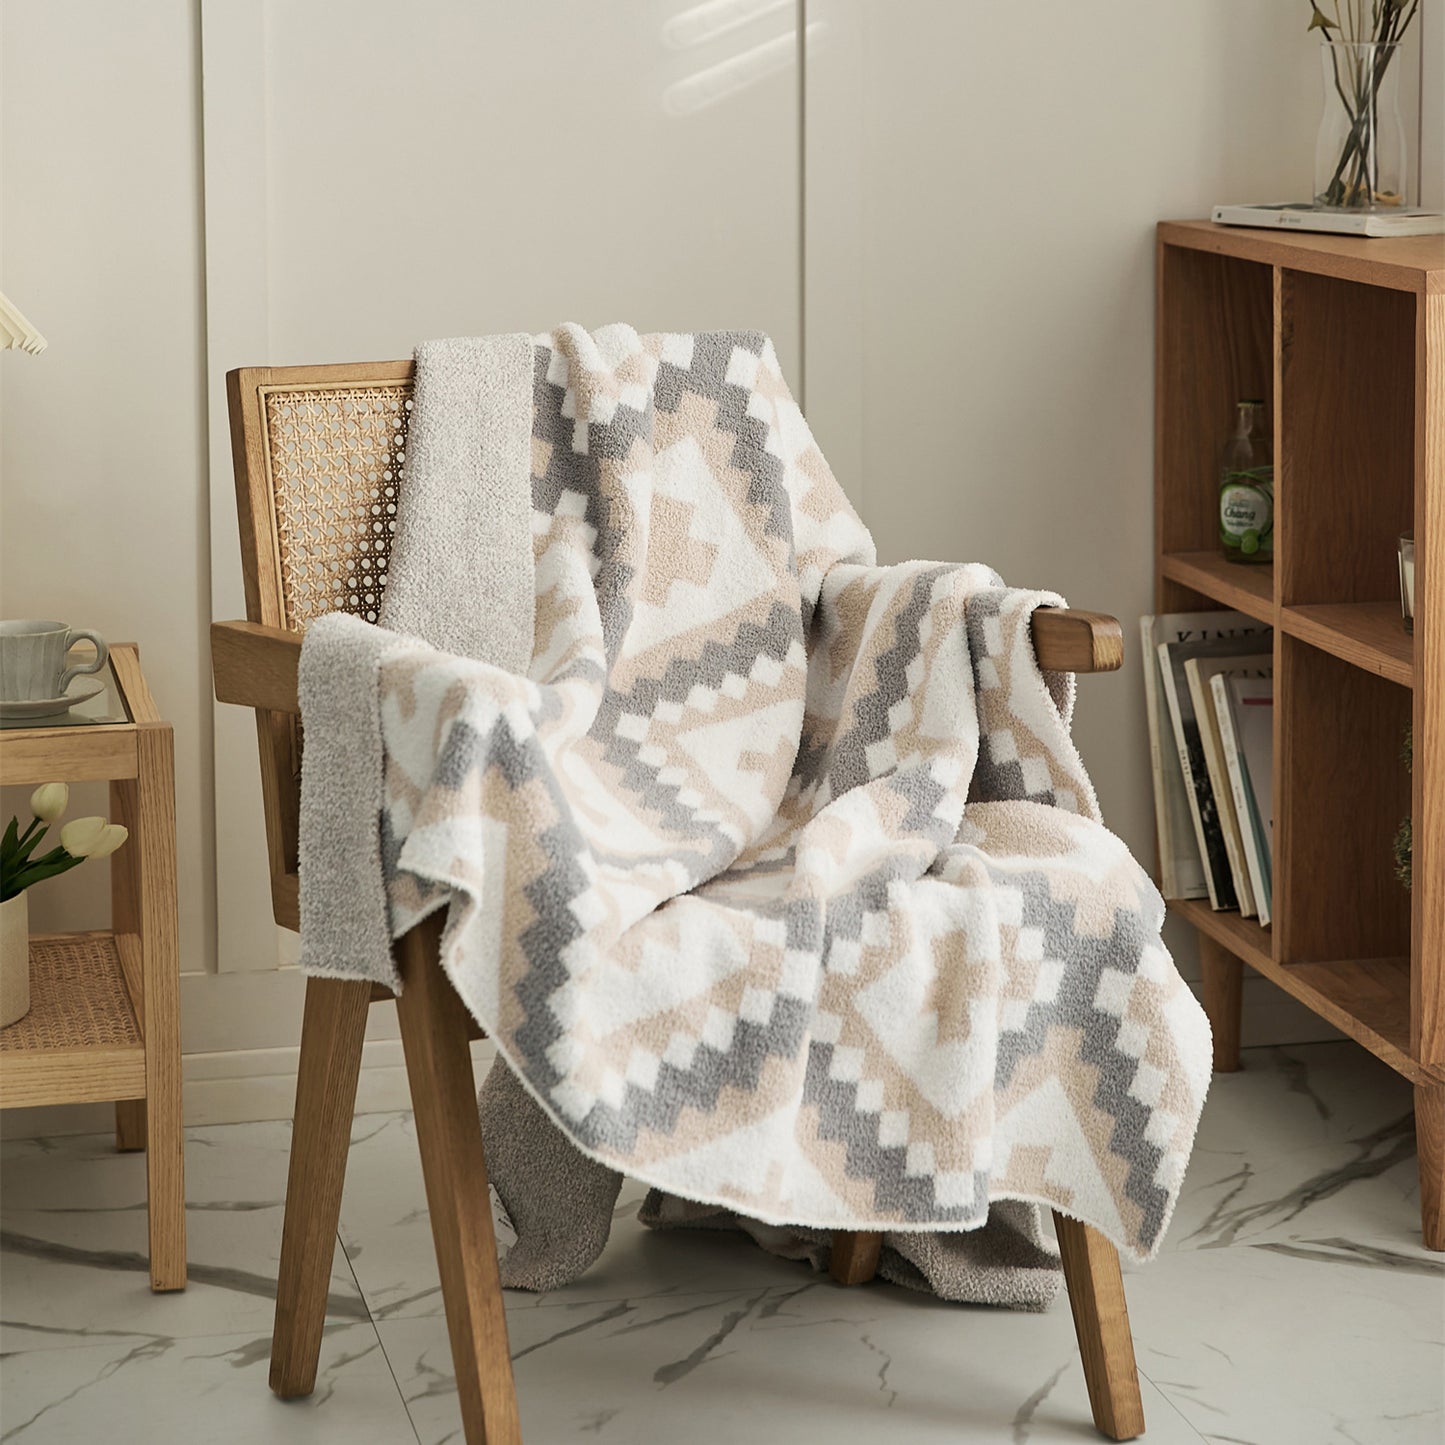 Geometric Patterns Fleece Blanket Pure Cotton Tapestry Knitted Throw Blanket 130 x 160 CM